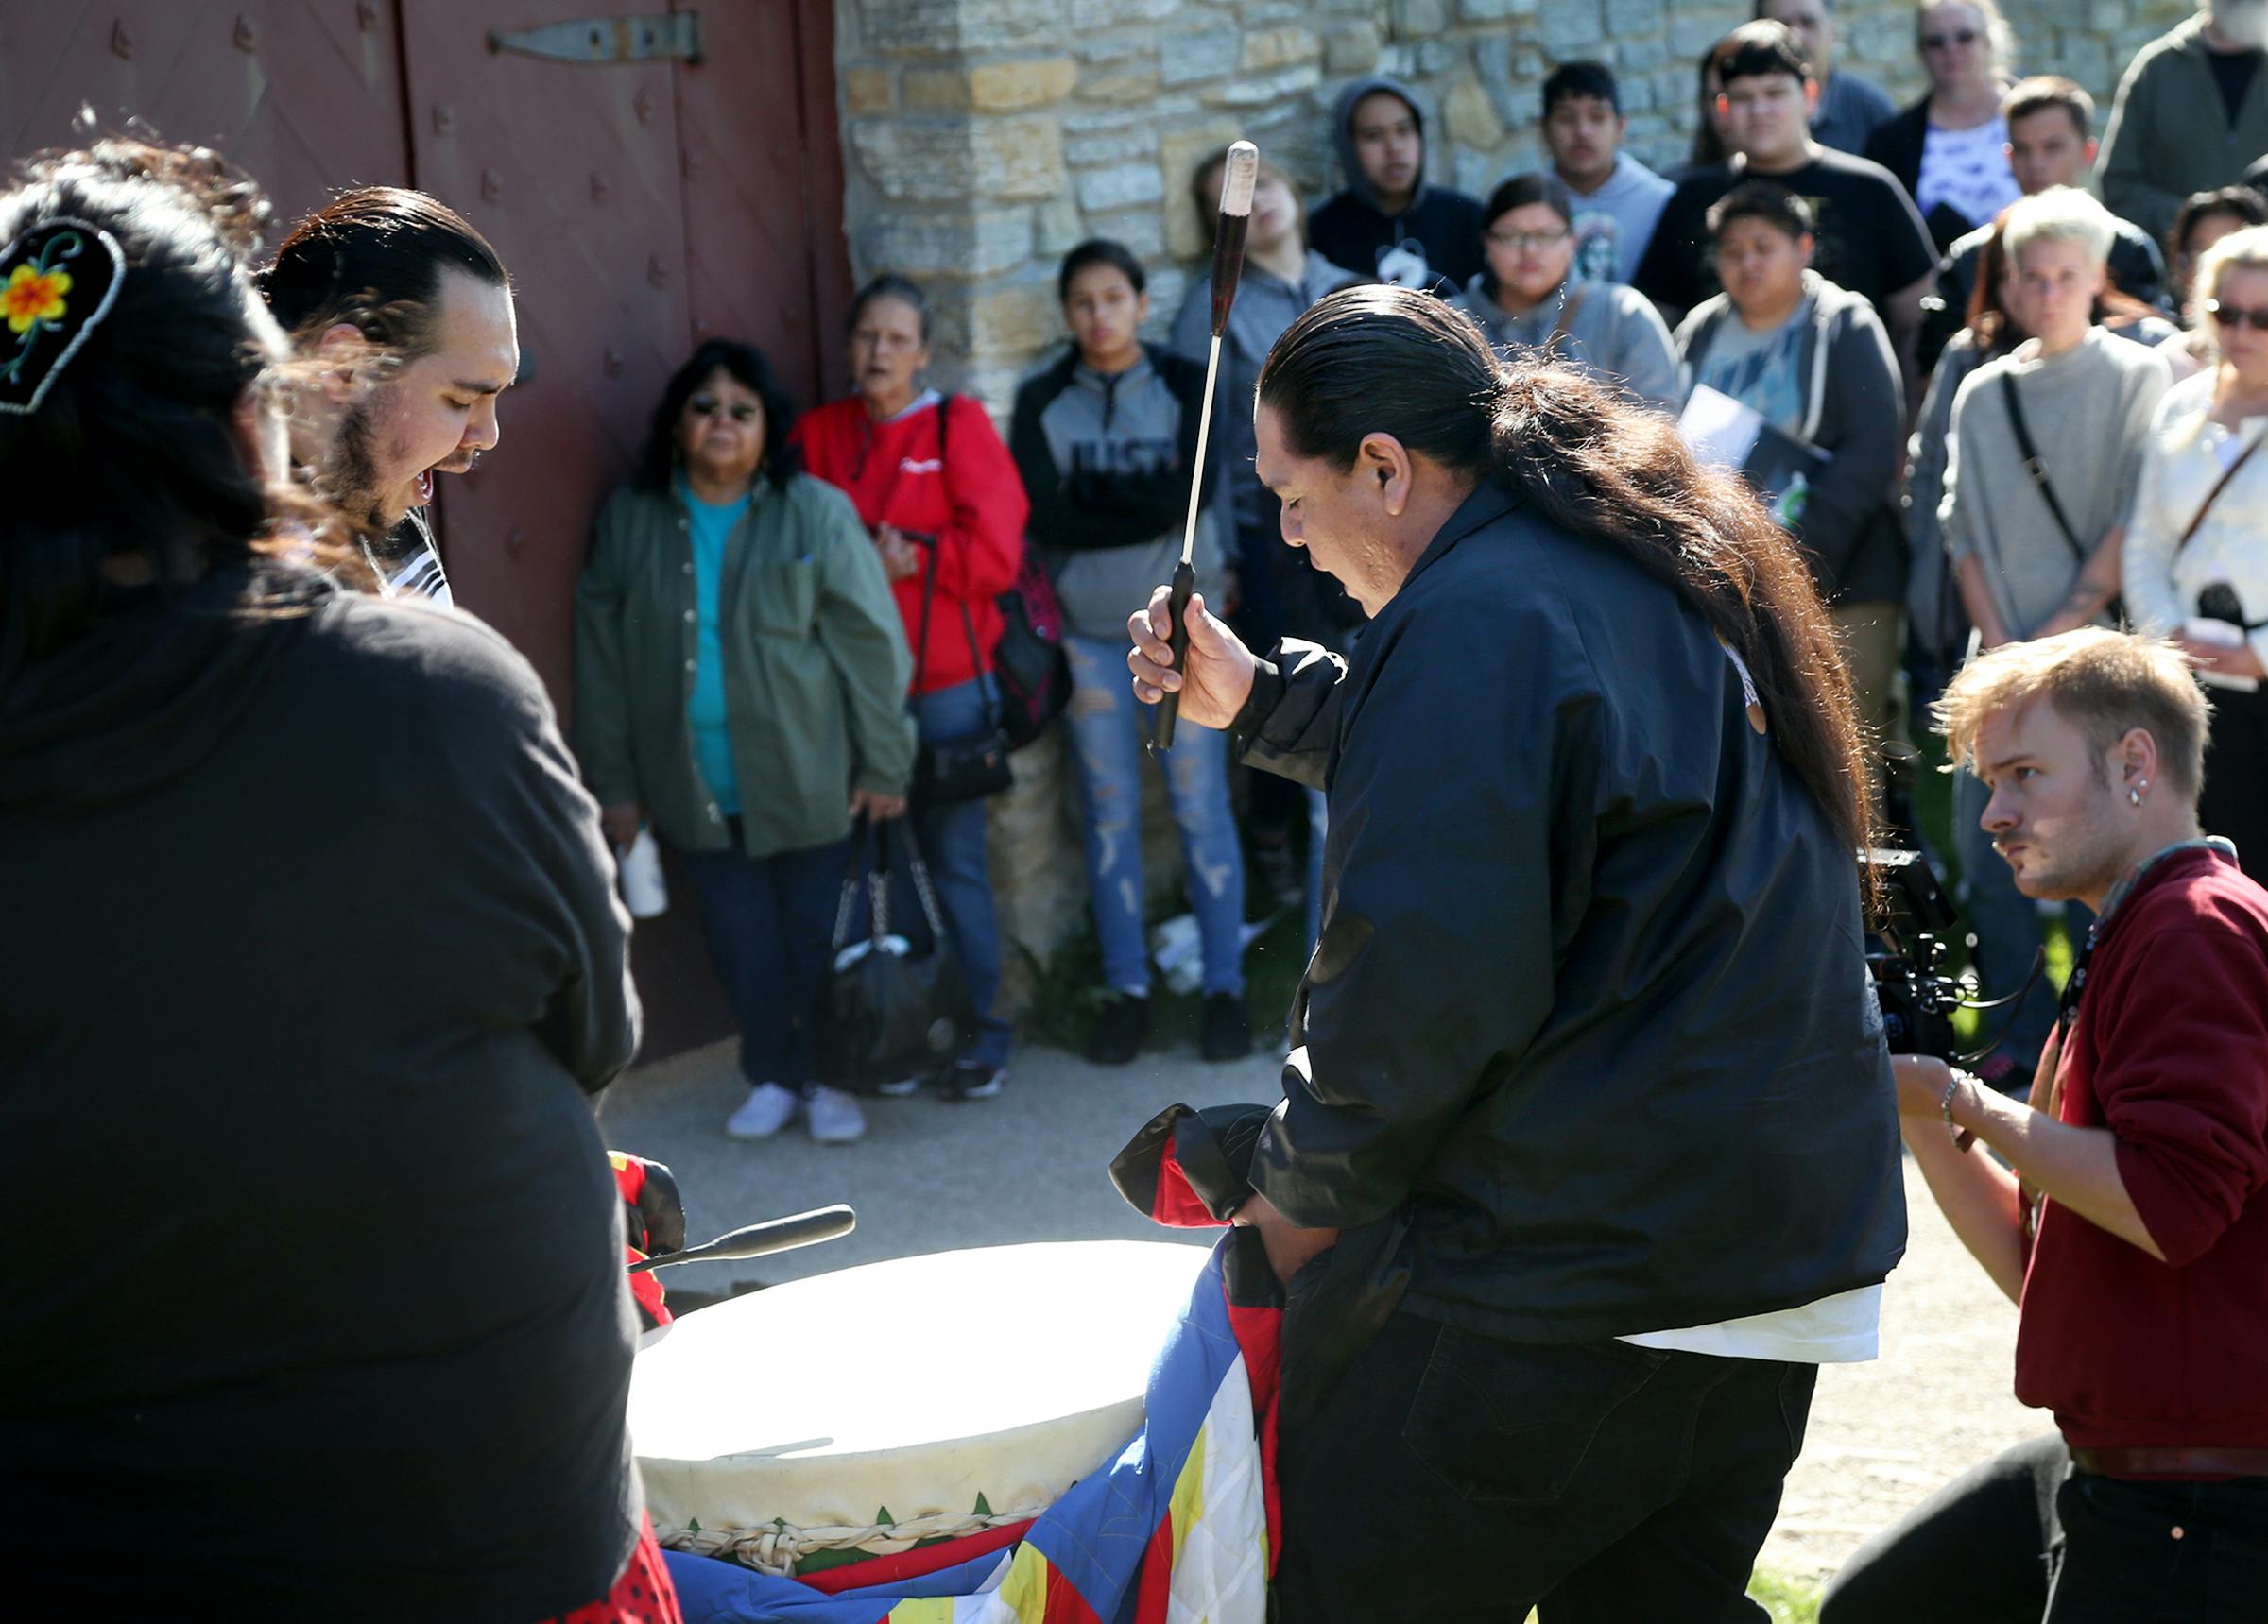 Members of the Hoka Hey drum group drummed and sang during an opening ceremony before Dakota people and others entered the gates of Fort Snelling during the Dakota Truth-Telling Gathering in 2017.